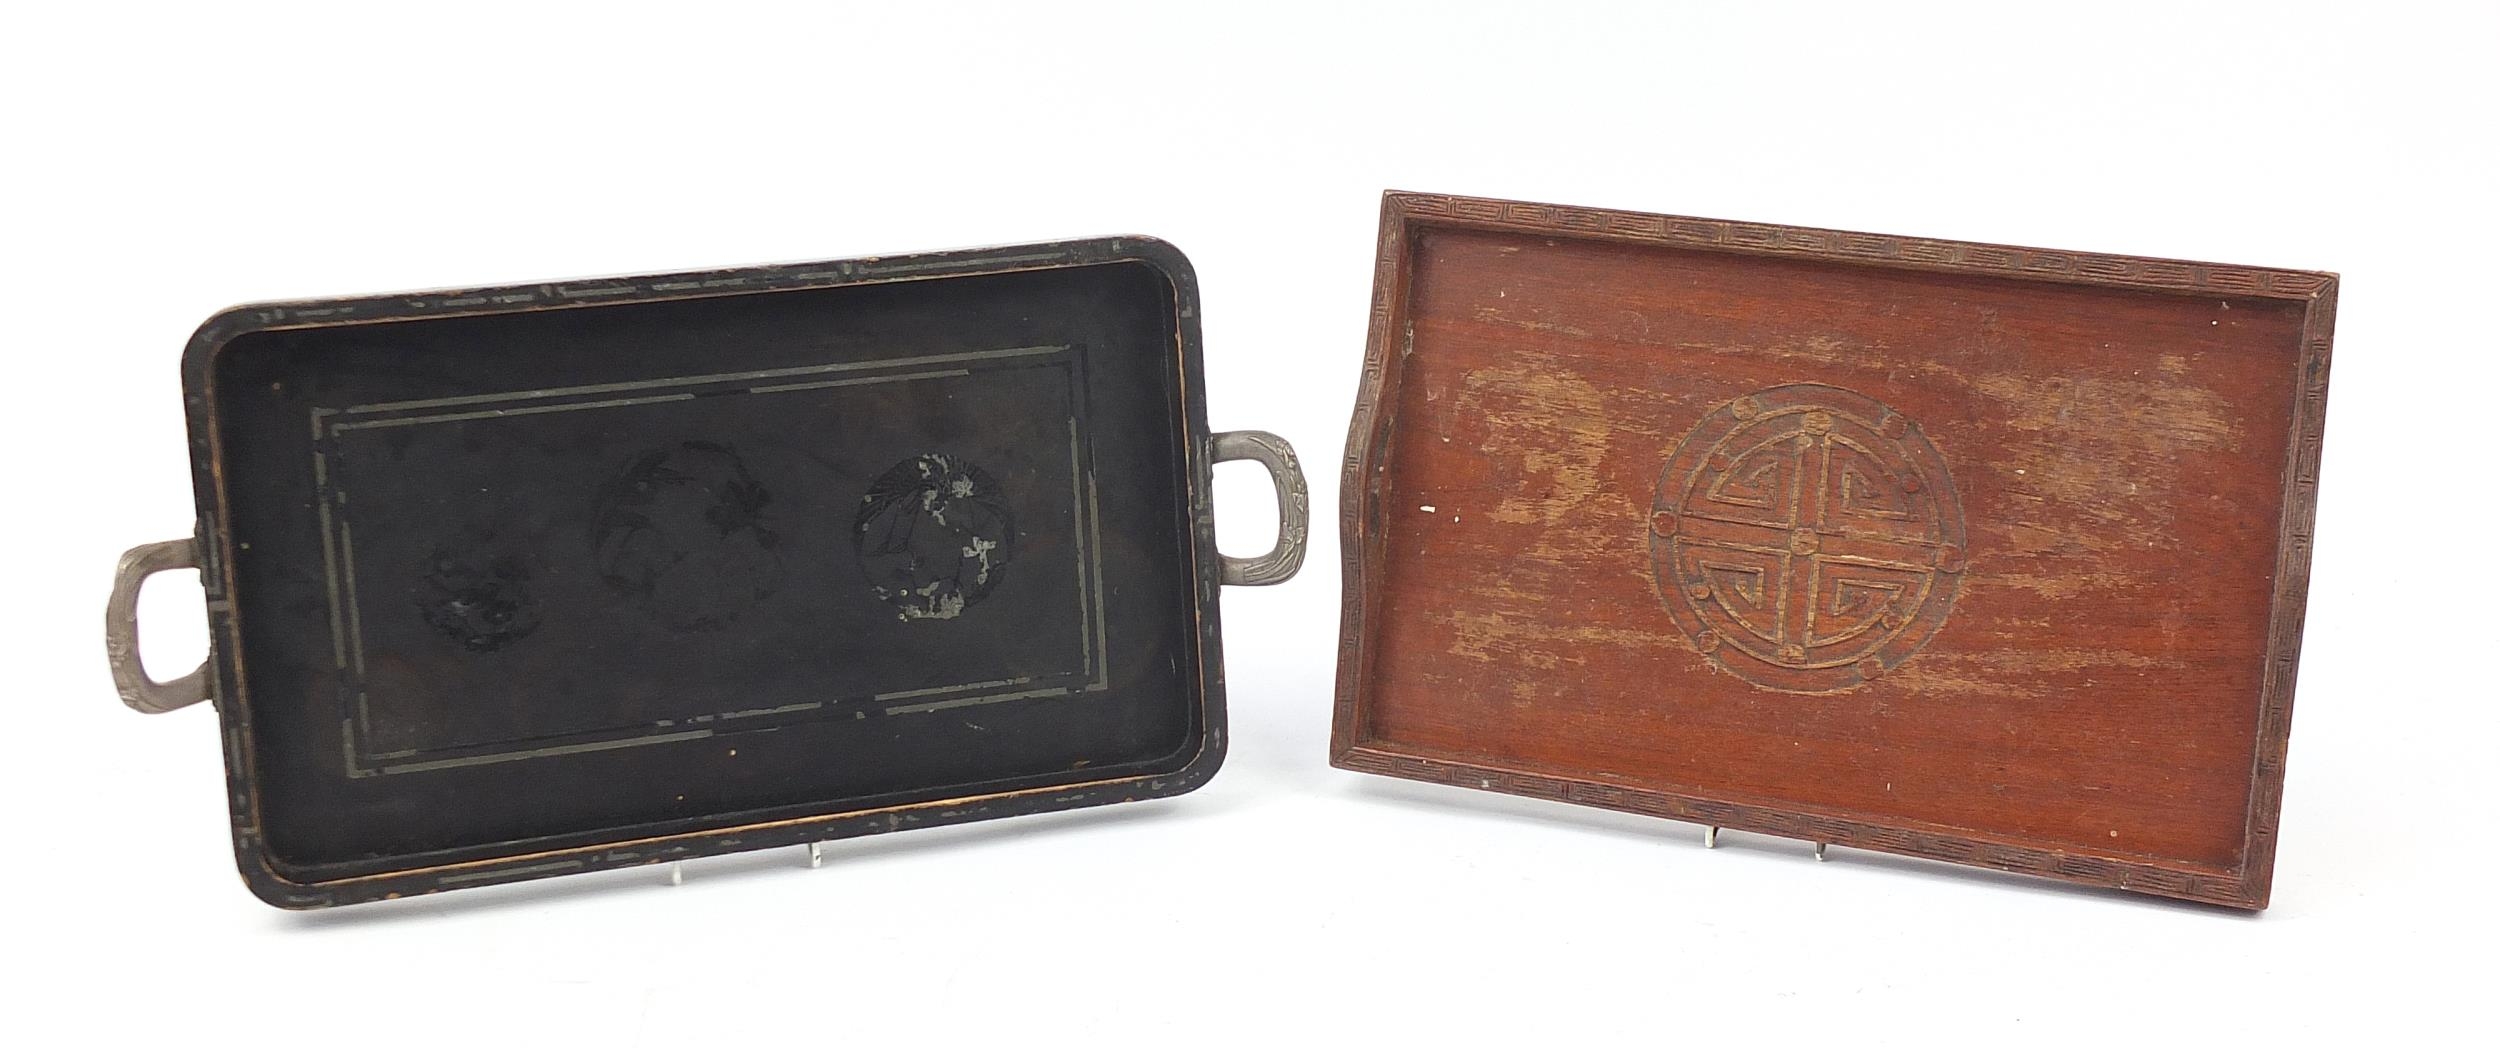 Two Japanese wooden trays, one lacquered in black and having white metal handles, the other having